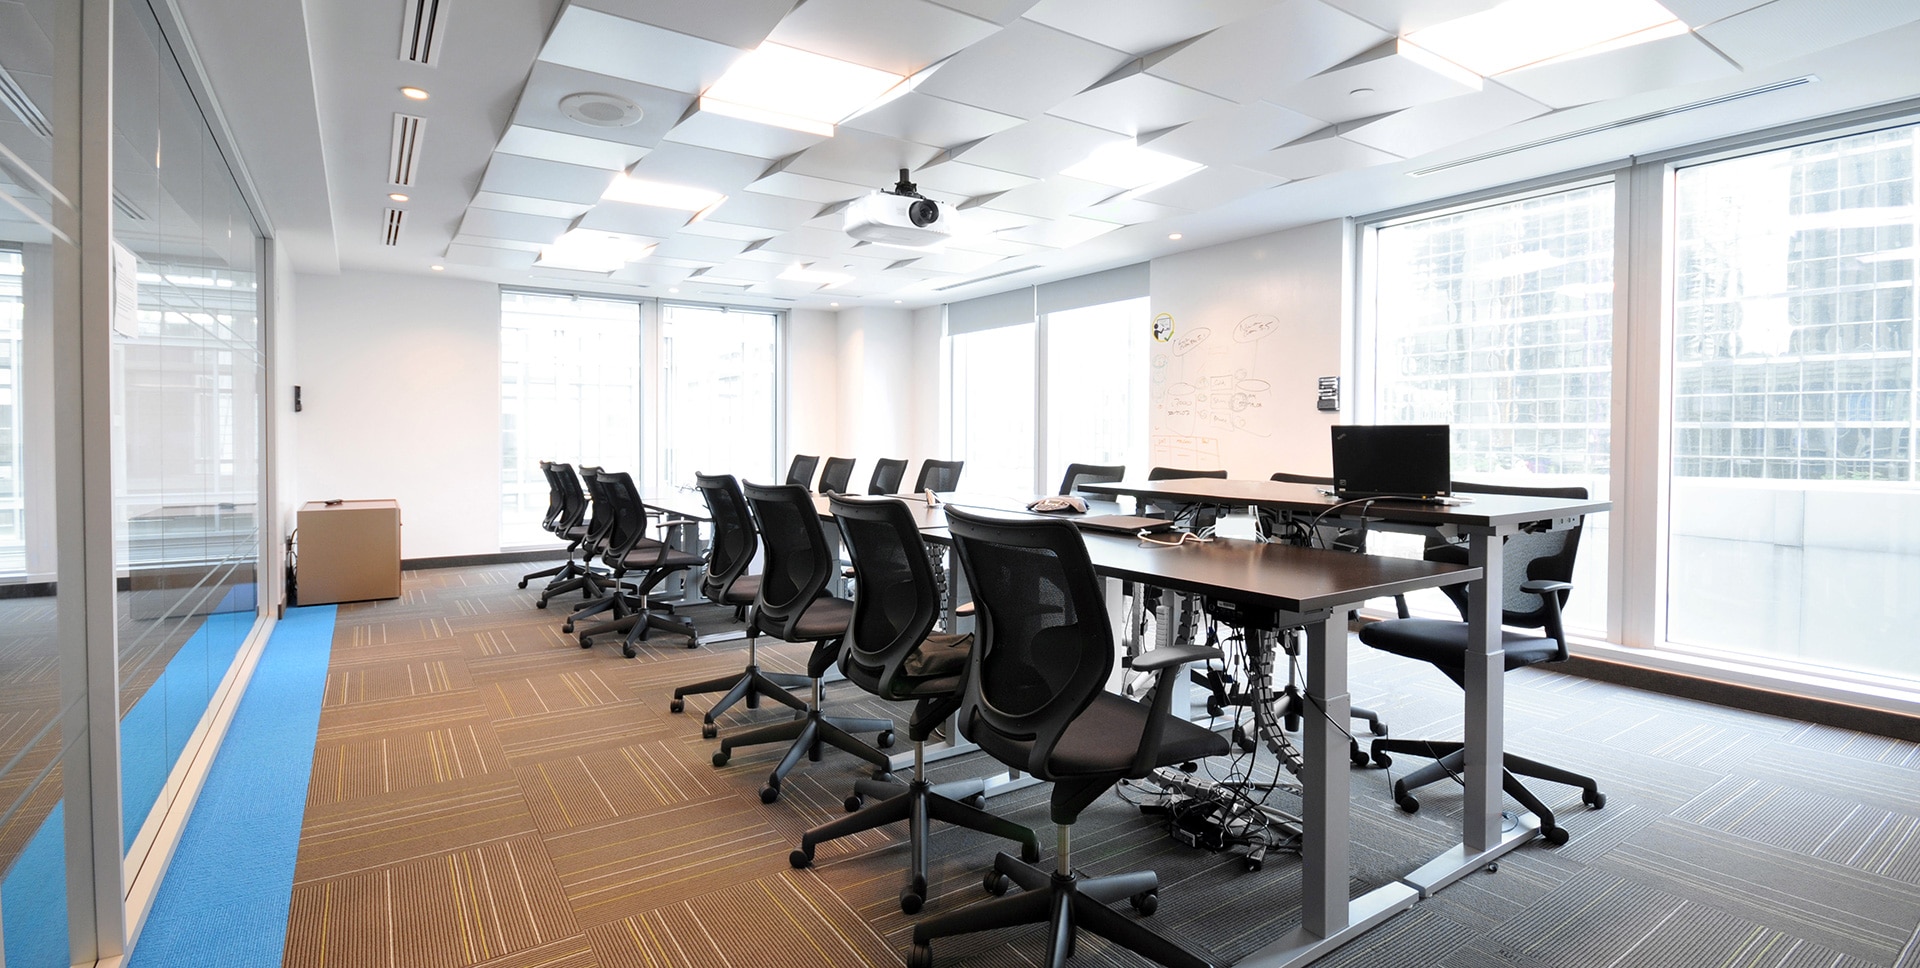 Meeting room at PSP Investments in Montreal designed by VAD